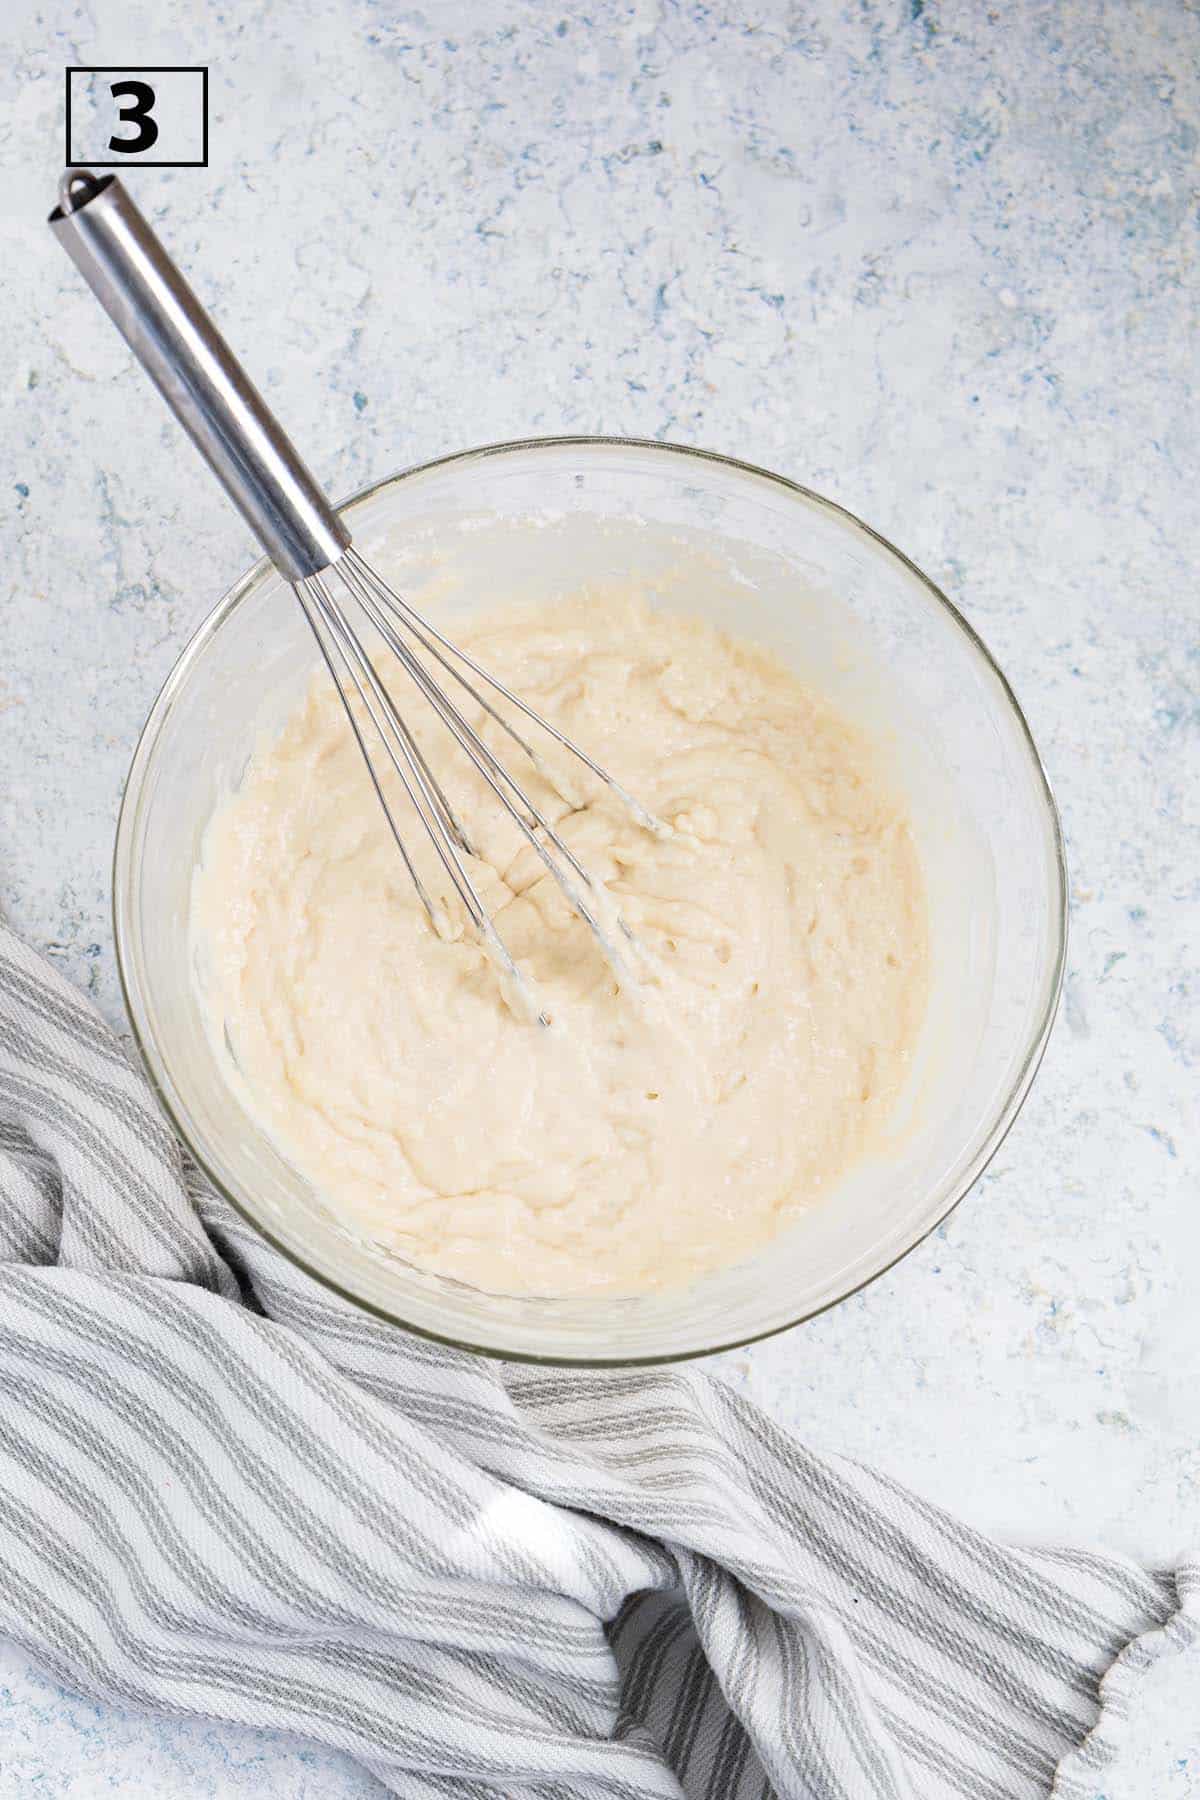 Pancake batter in a mixing bowl with a whisk